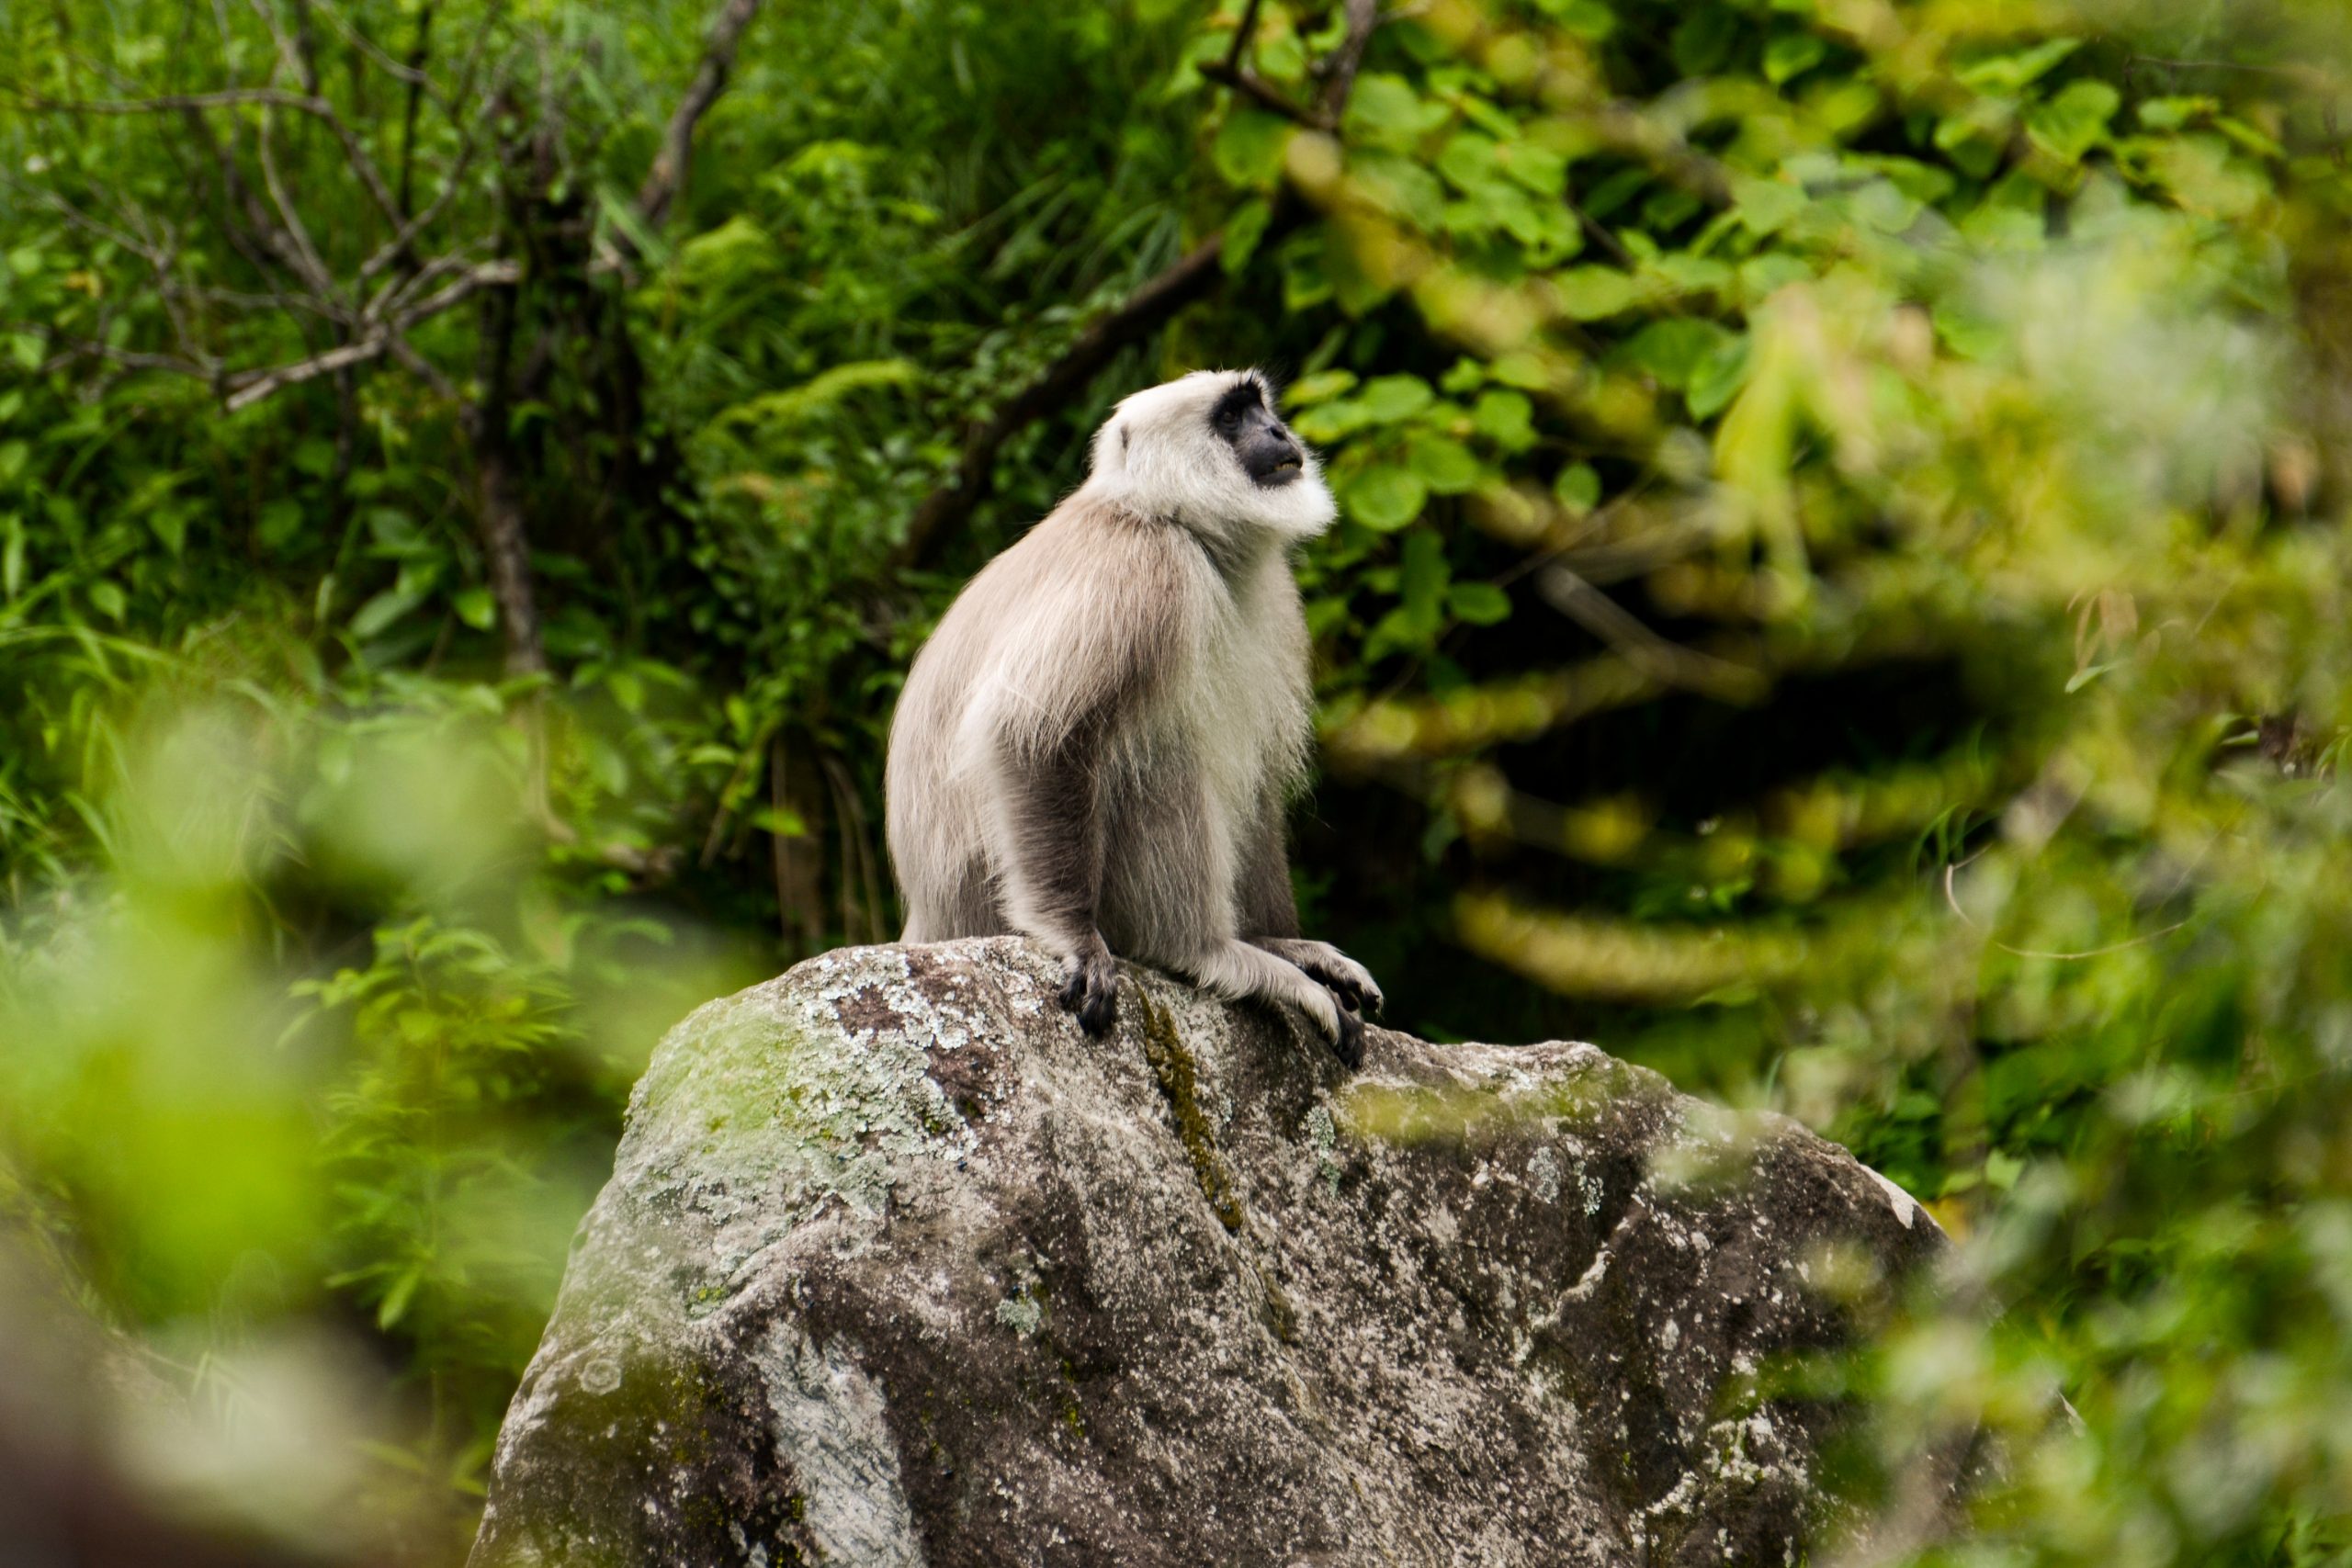 An adult male Himalayan Langur is in the center of the image, sitting on a rock, and gazing towards the south. His surroundings are blooming in the green colors of the summer season.